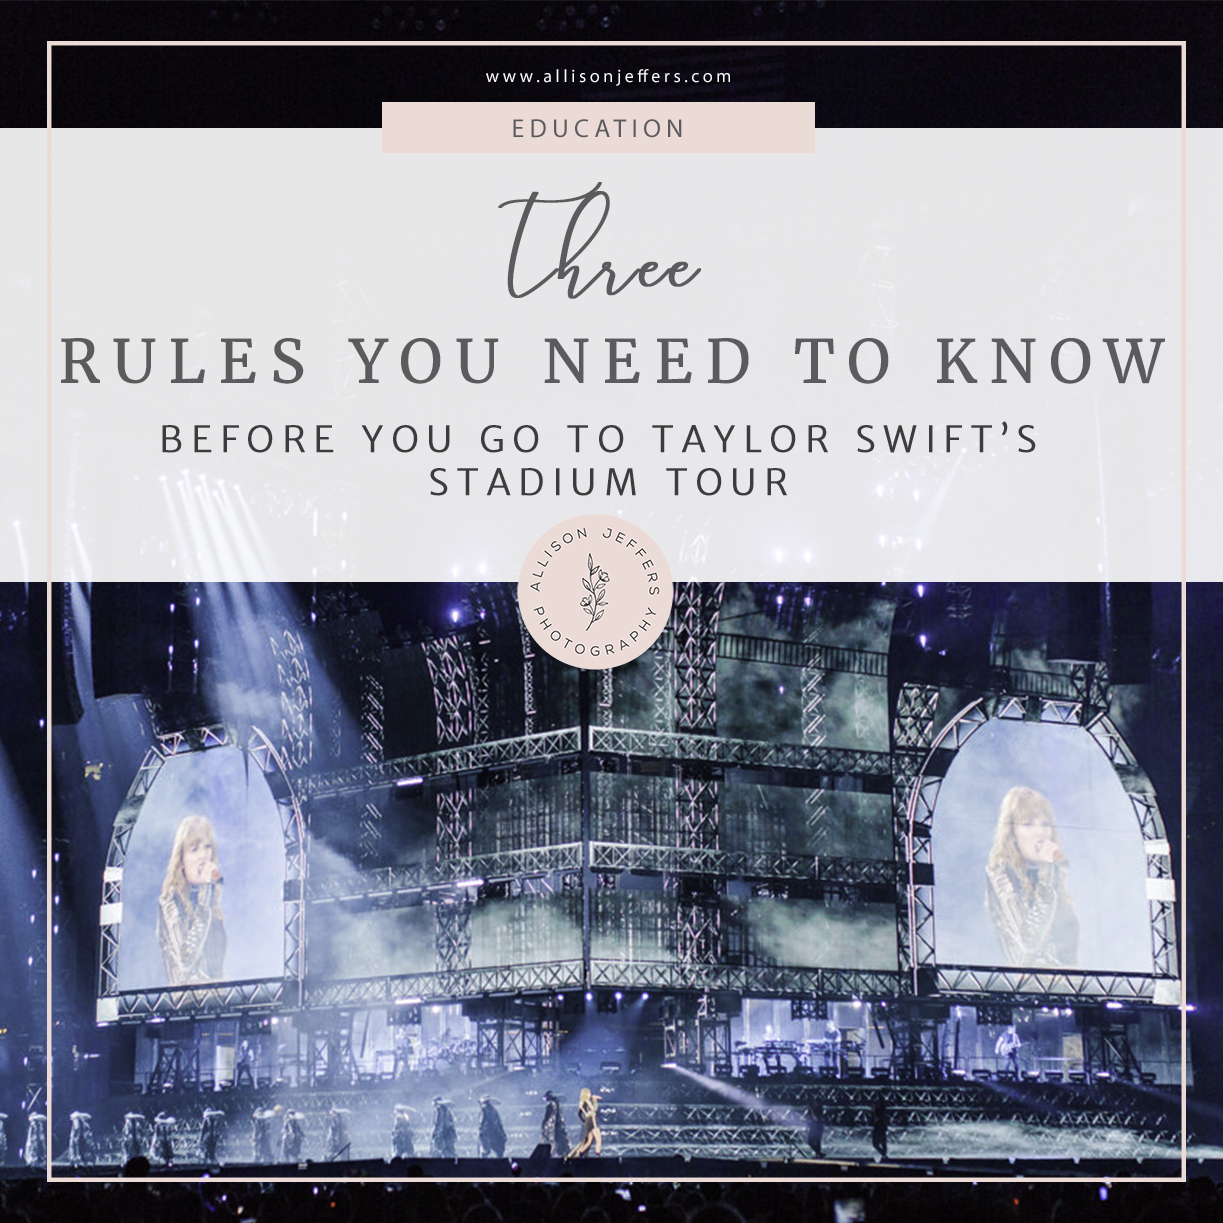 THREE RULES TO KNOW ABOUT TAYLOR SWIFTS STADIUM REPUTATION TOUR